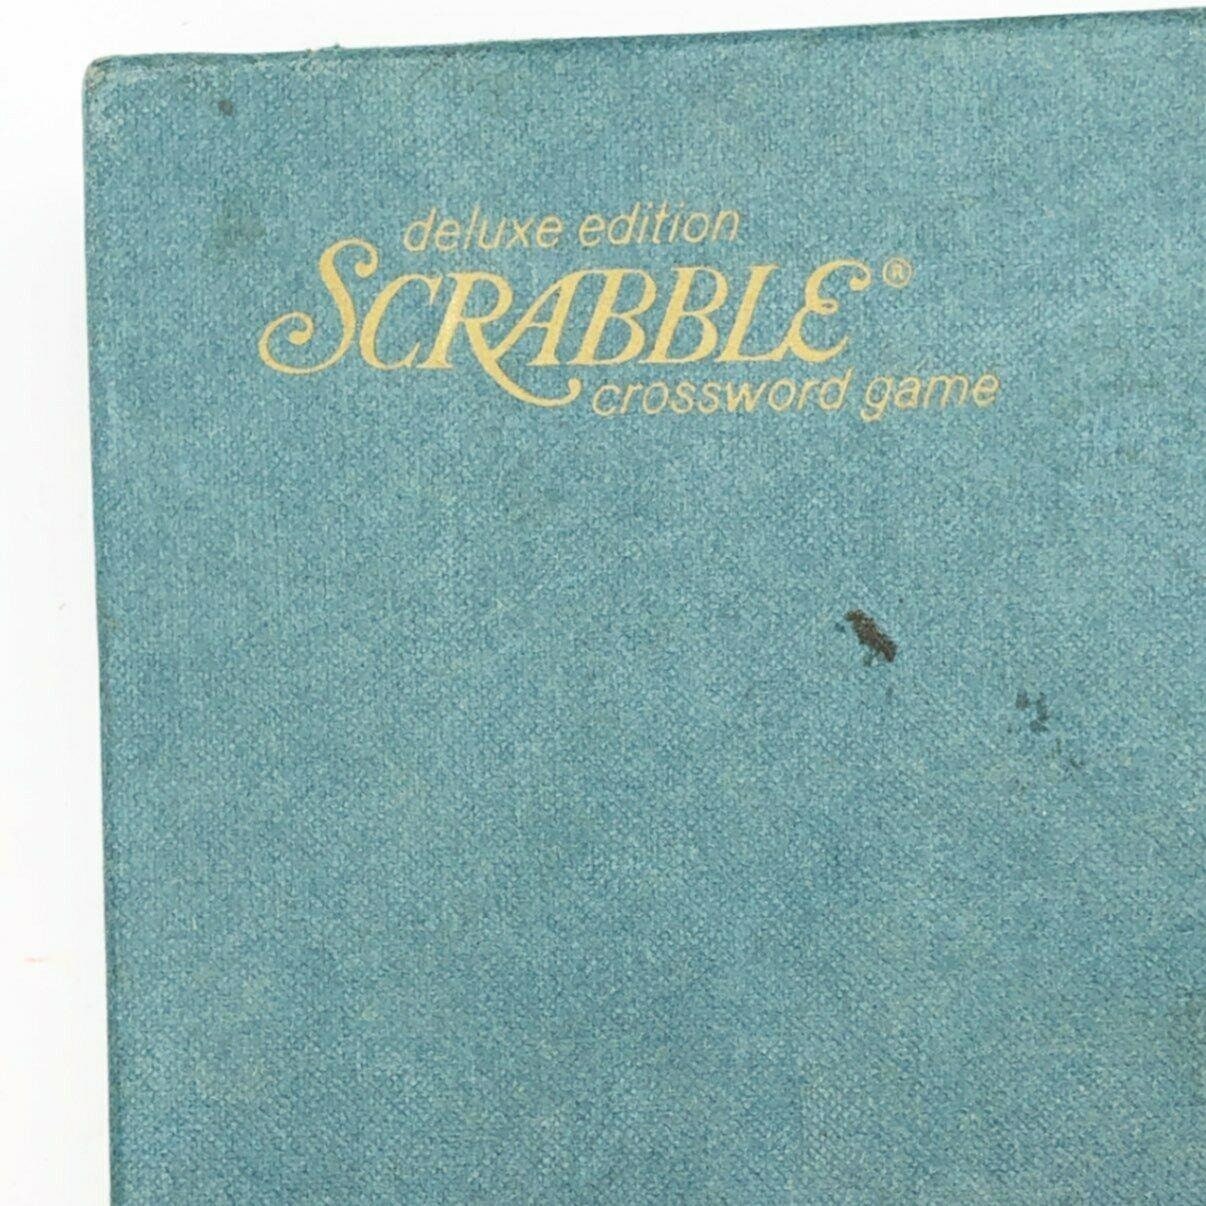 1977 Scrabble Deluxe Turntable Edition. $3. : r/ThriftStoreHauls